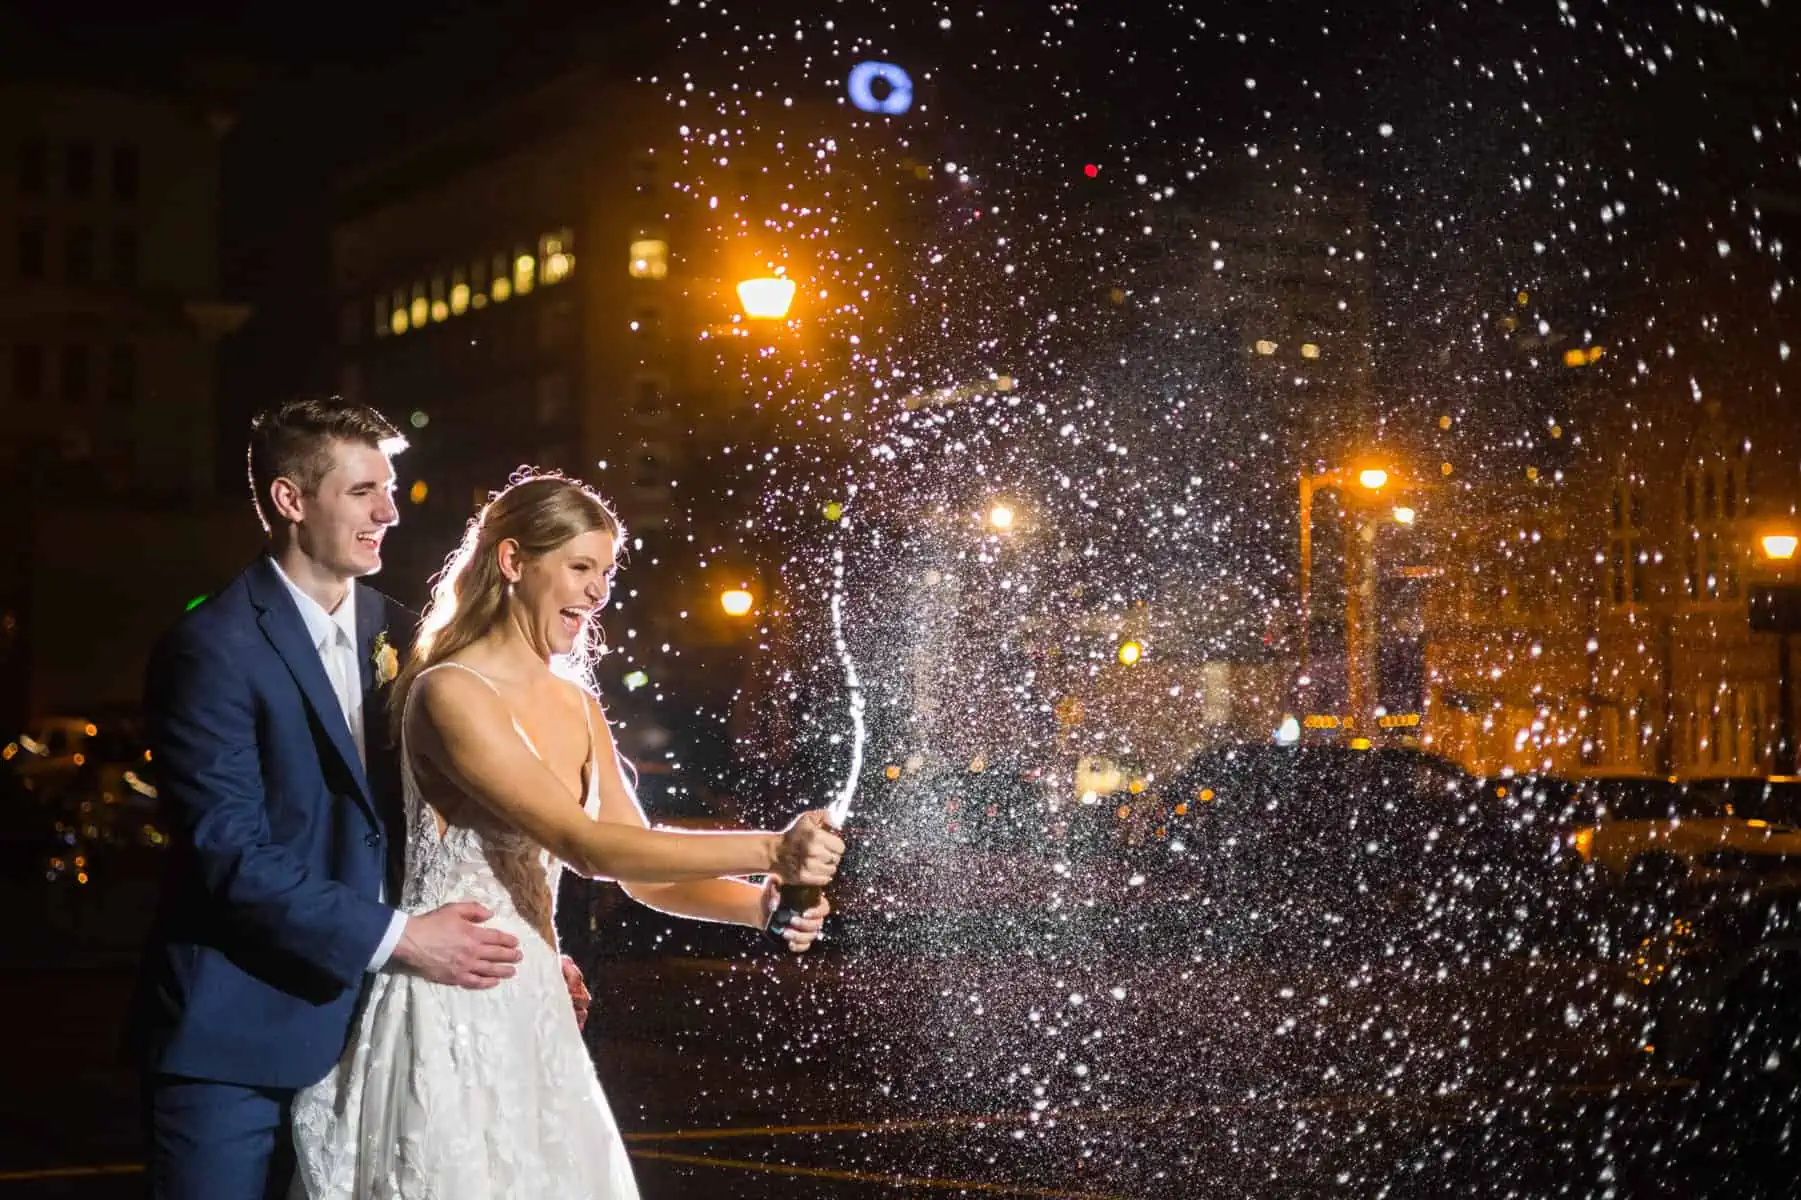 A bride and groom are holding a champagne bottle in front of a building at night.